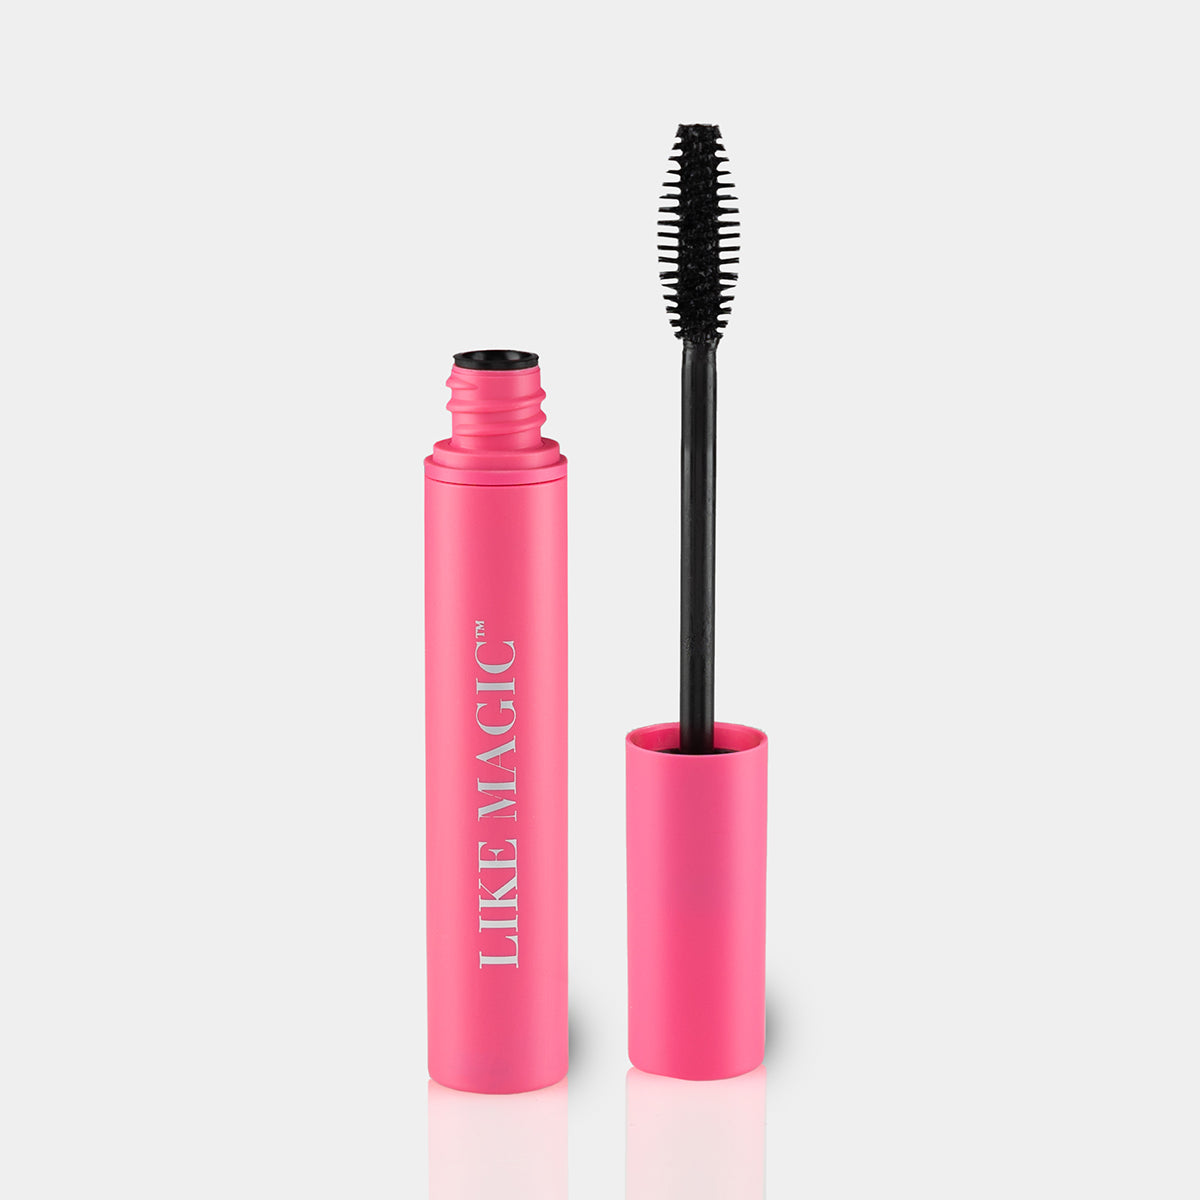 Opened tube of Like Magic black mascara in pink bottle with bristles showing